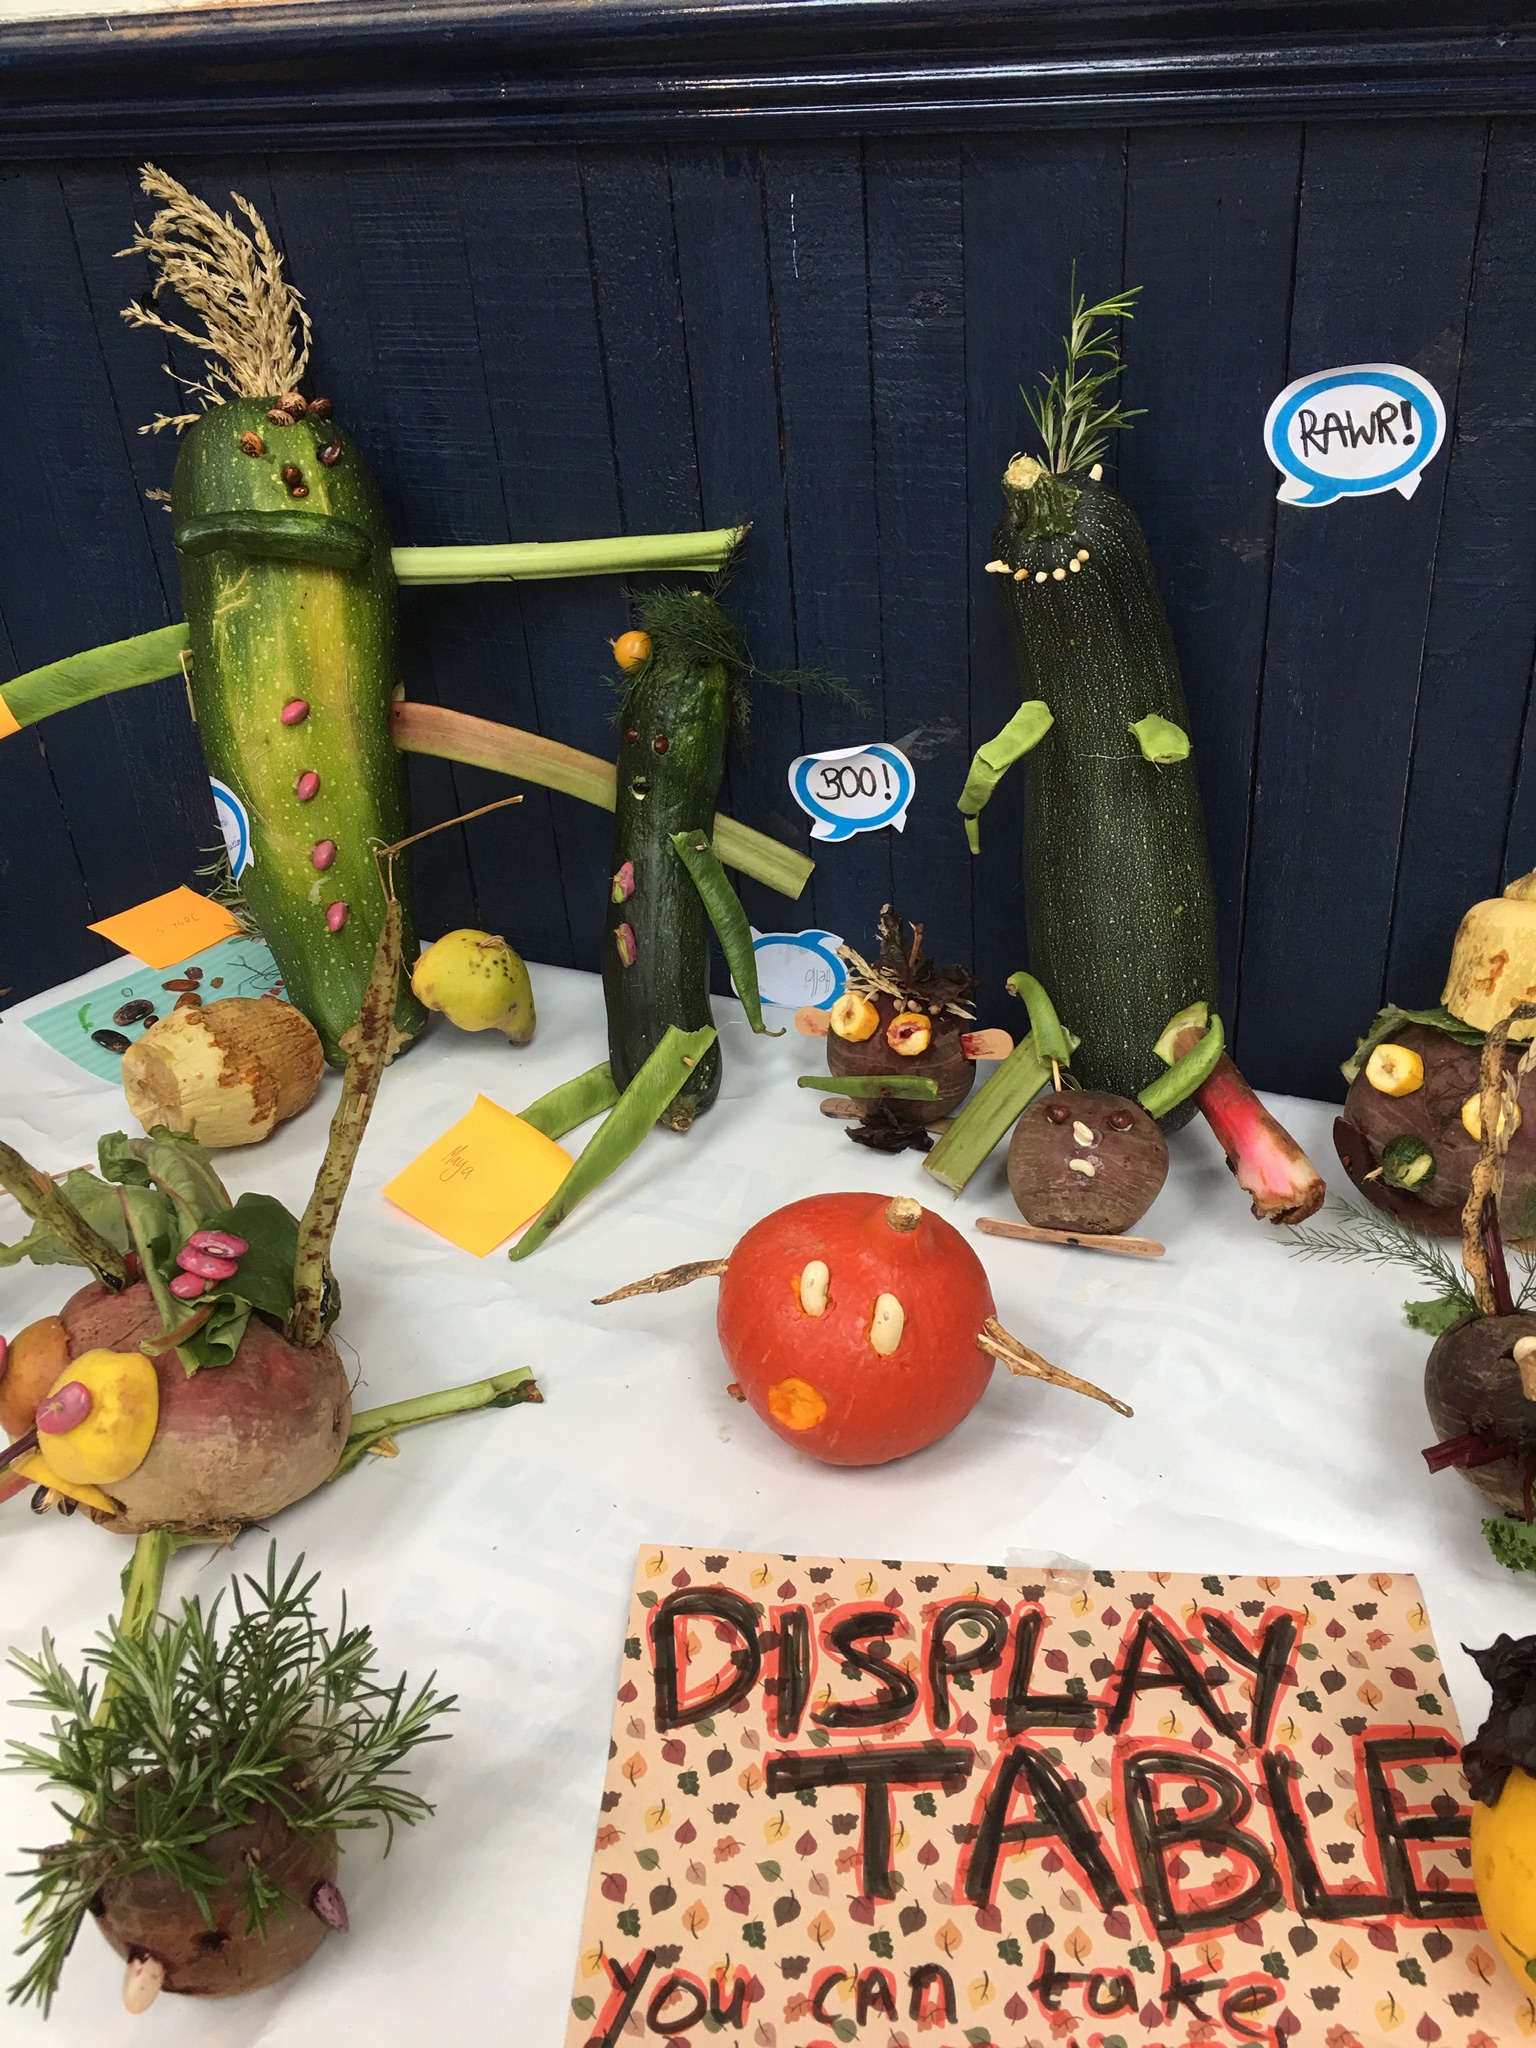 Corgettes decorated as people using other vegetables